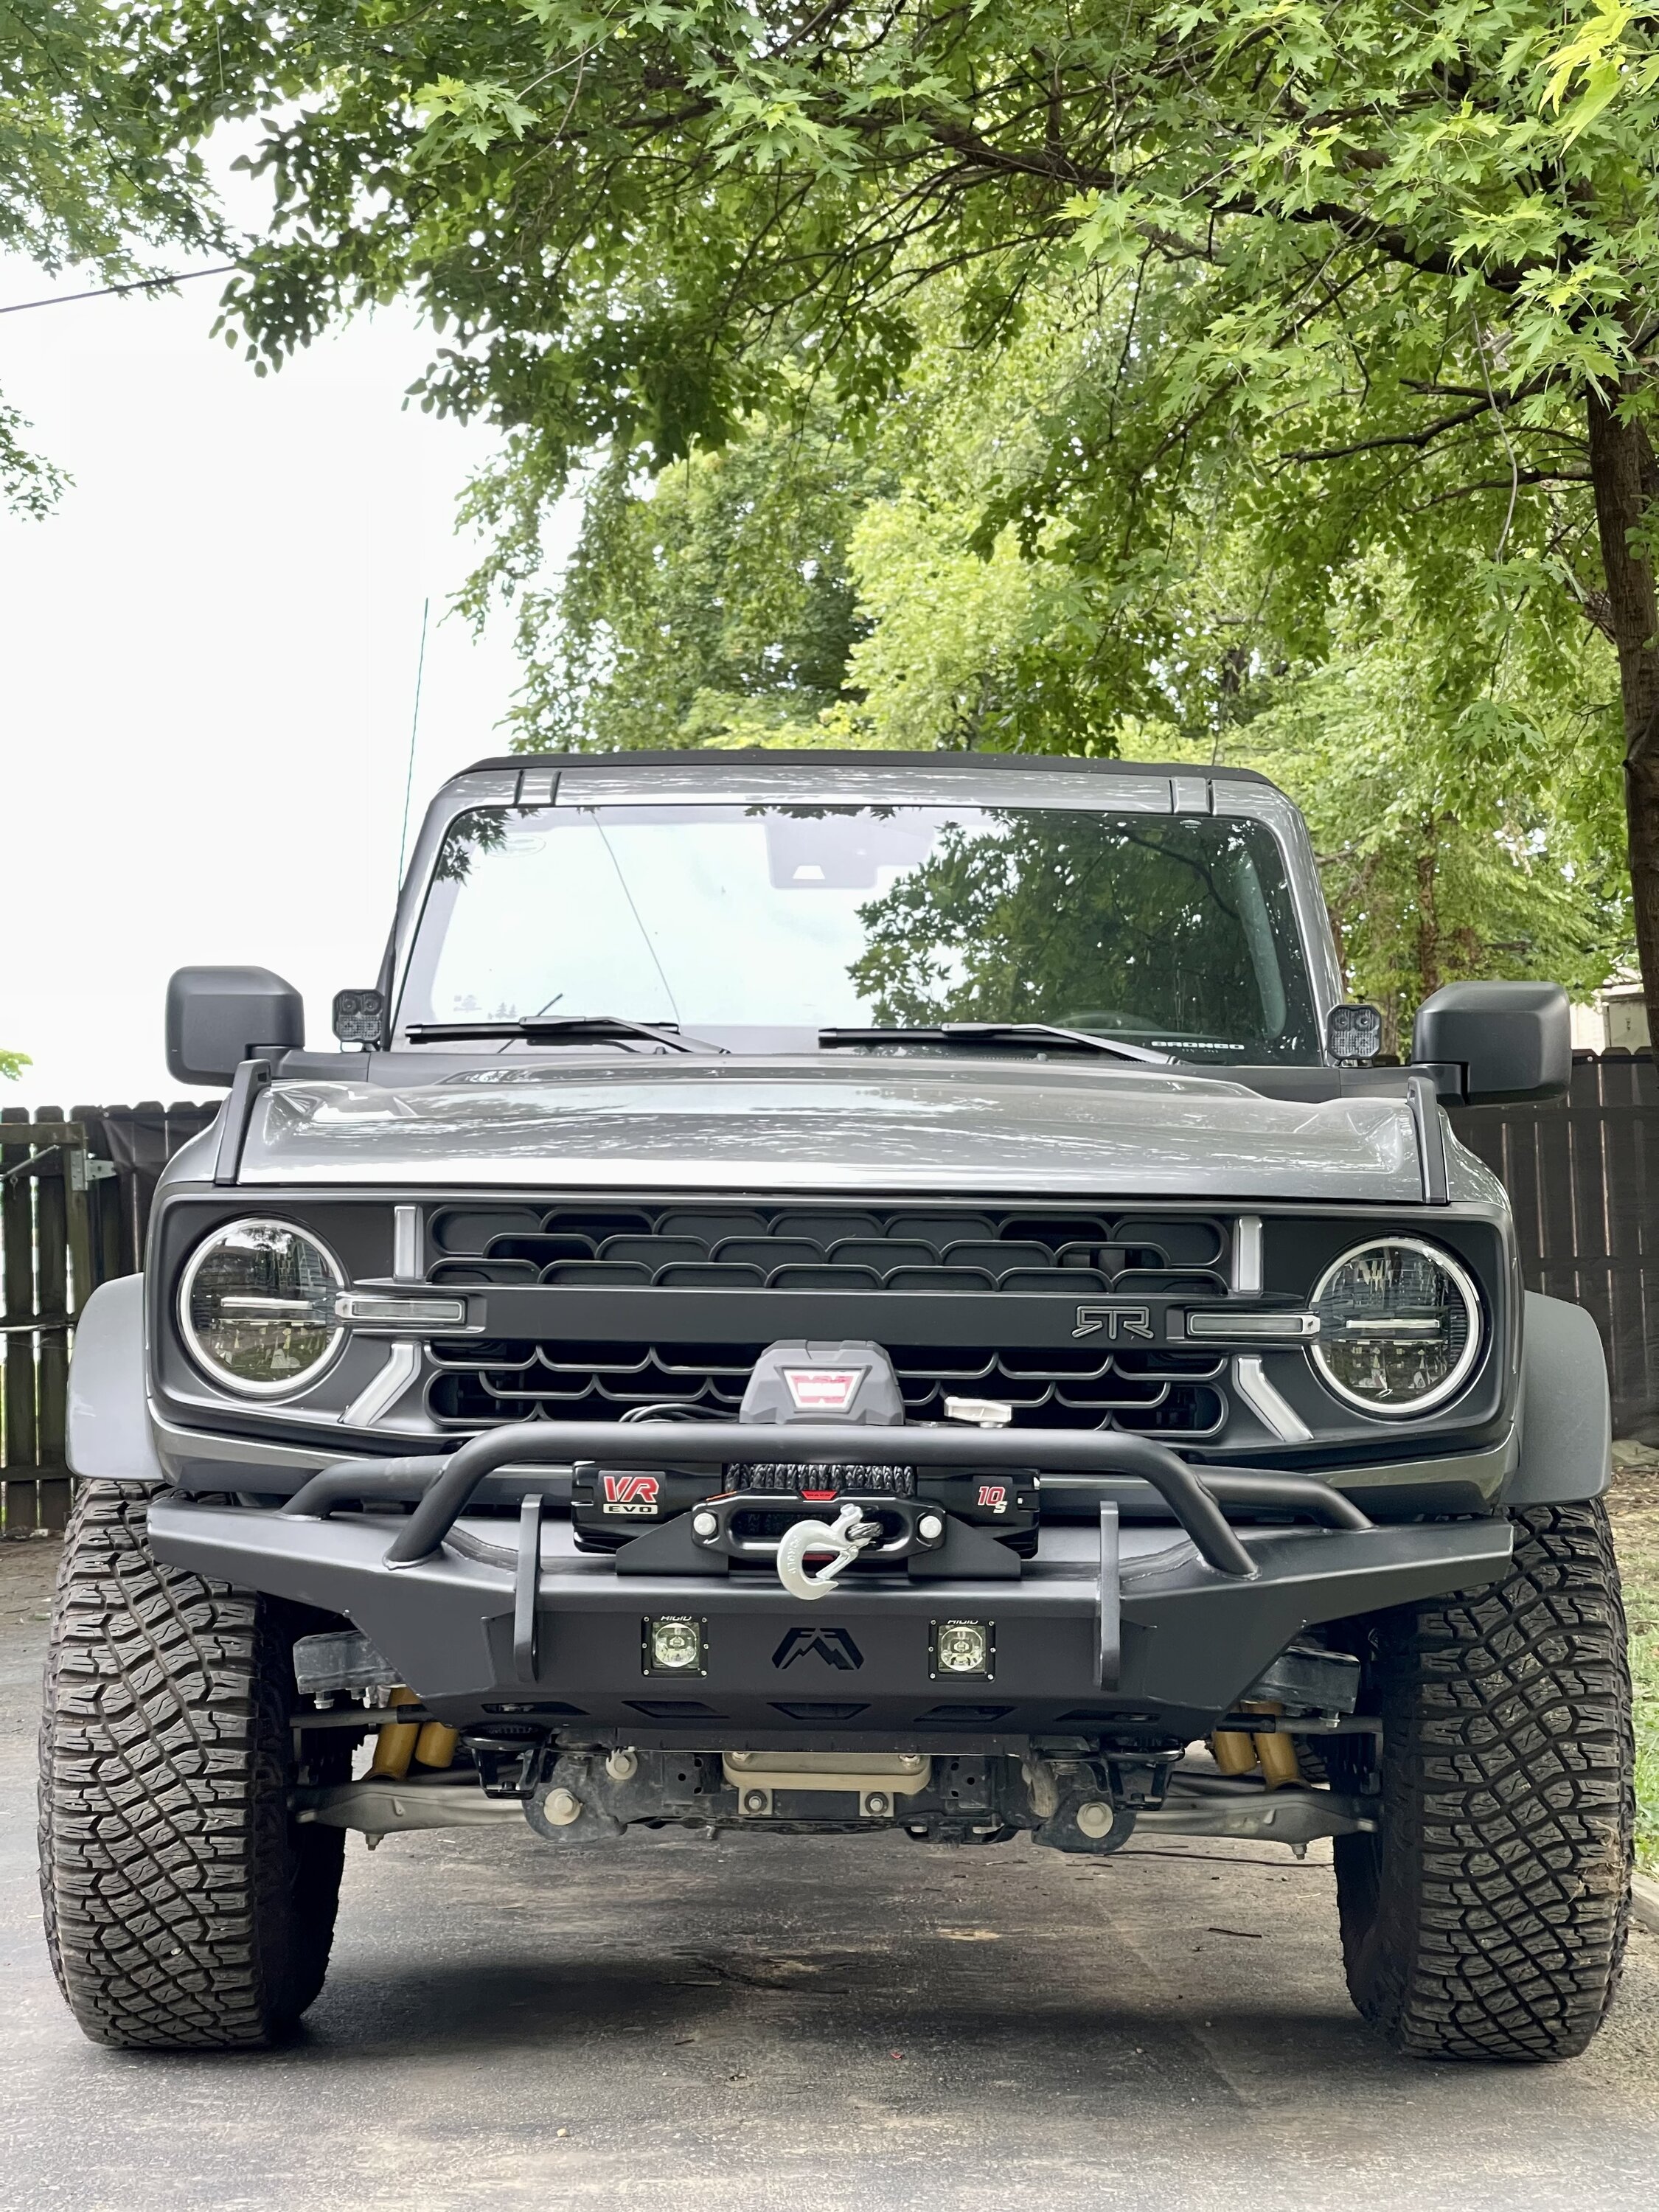 Ford Bronco A couple of additions: FabFours stubby bumper and Warn EVO 10s winch C2759FBC-9672-4AE4-98EA-A37EEC72B4C8